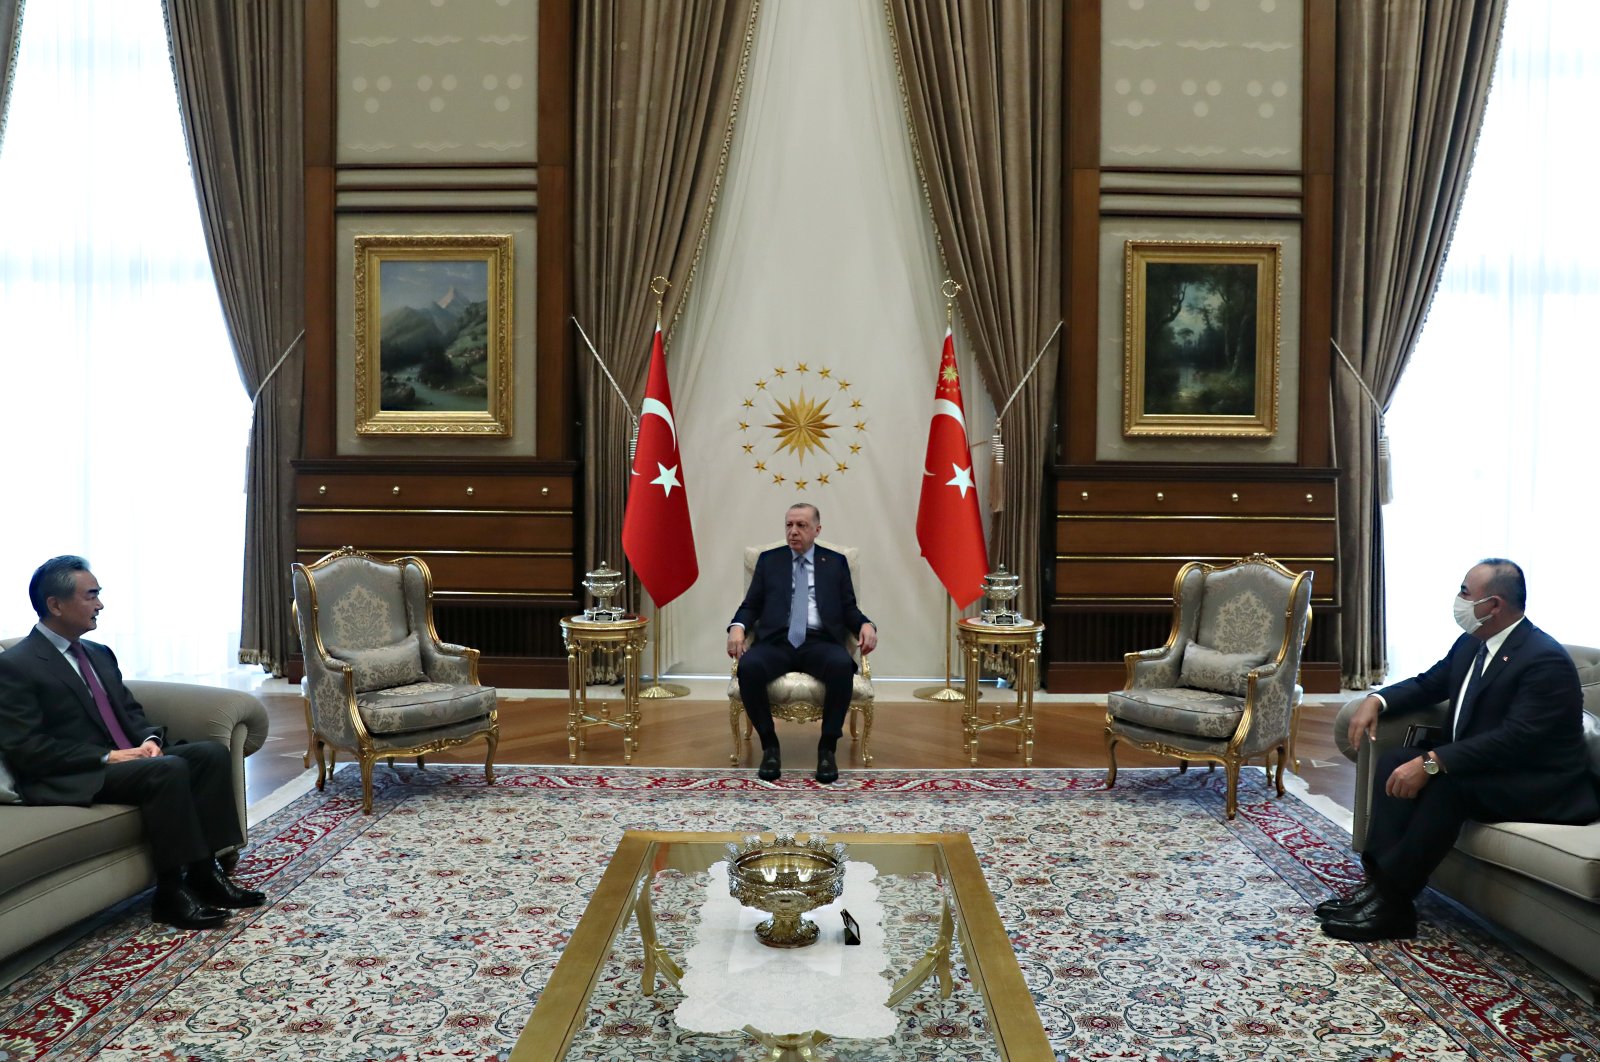 Chinese State Councilor and Foreign Minister Wang Yi (L), Turkish President Recep Tayyip Erdoğan (C) and Foreign Minister Mevlüt Çavuşoğlu meet at the Presidential Palace, Ankara, Turkey, March 25, 2021. (REUTERS)